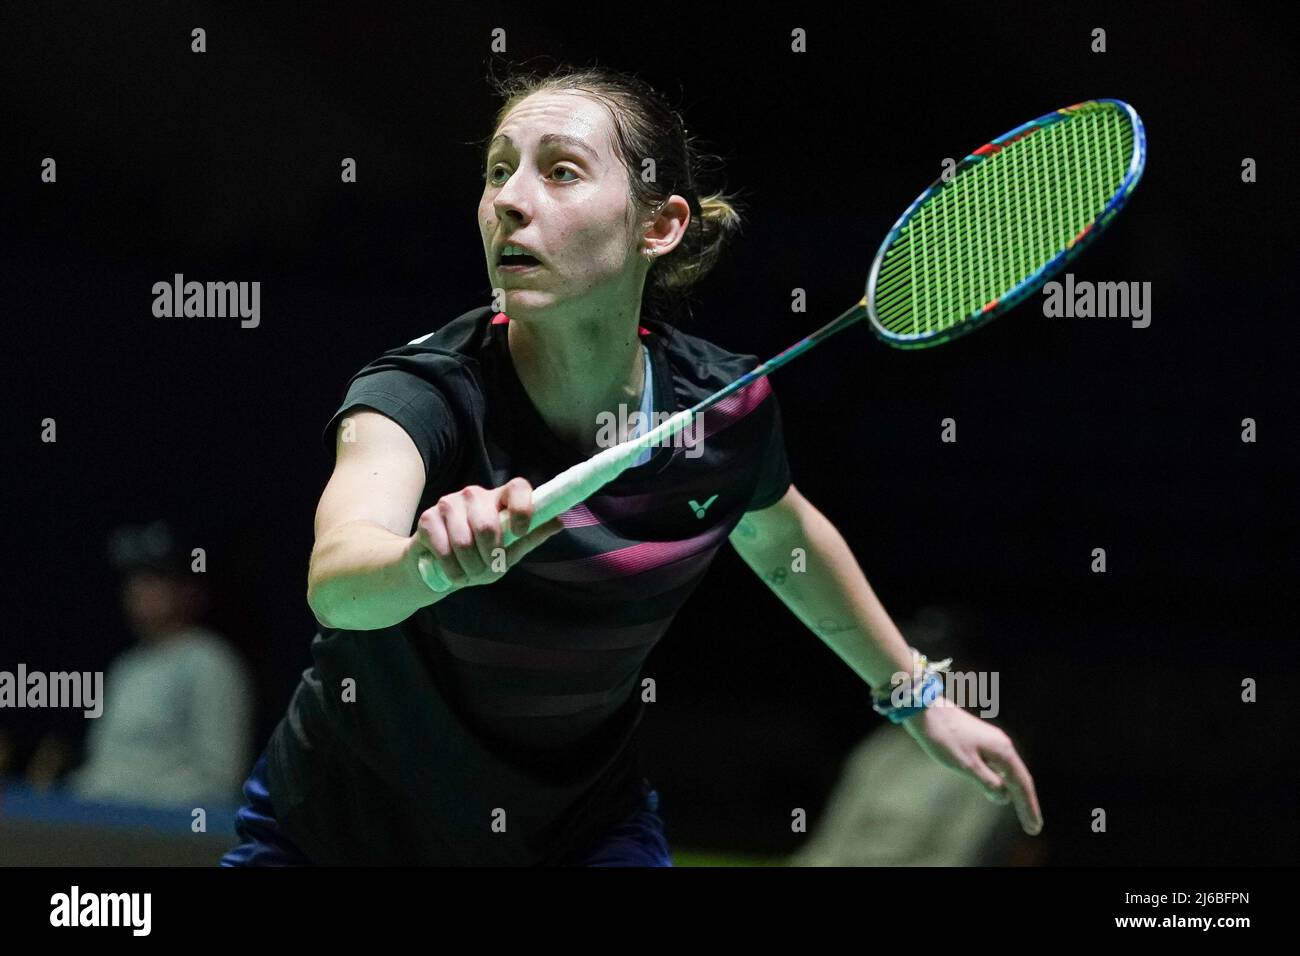 Kirsty Gilmour of England seen in action during the European Badminton Championships semi finals against Mia Blichfeldt of Denmark